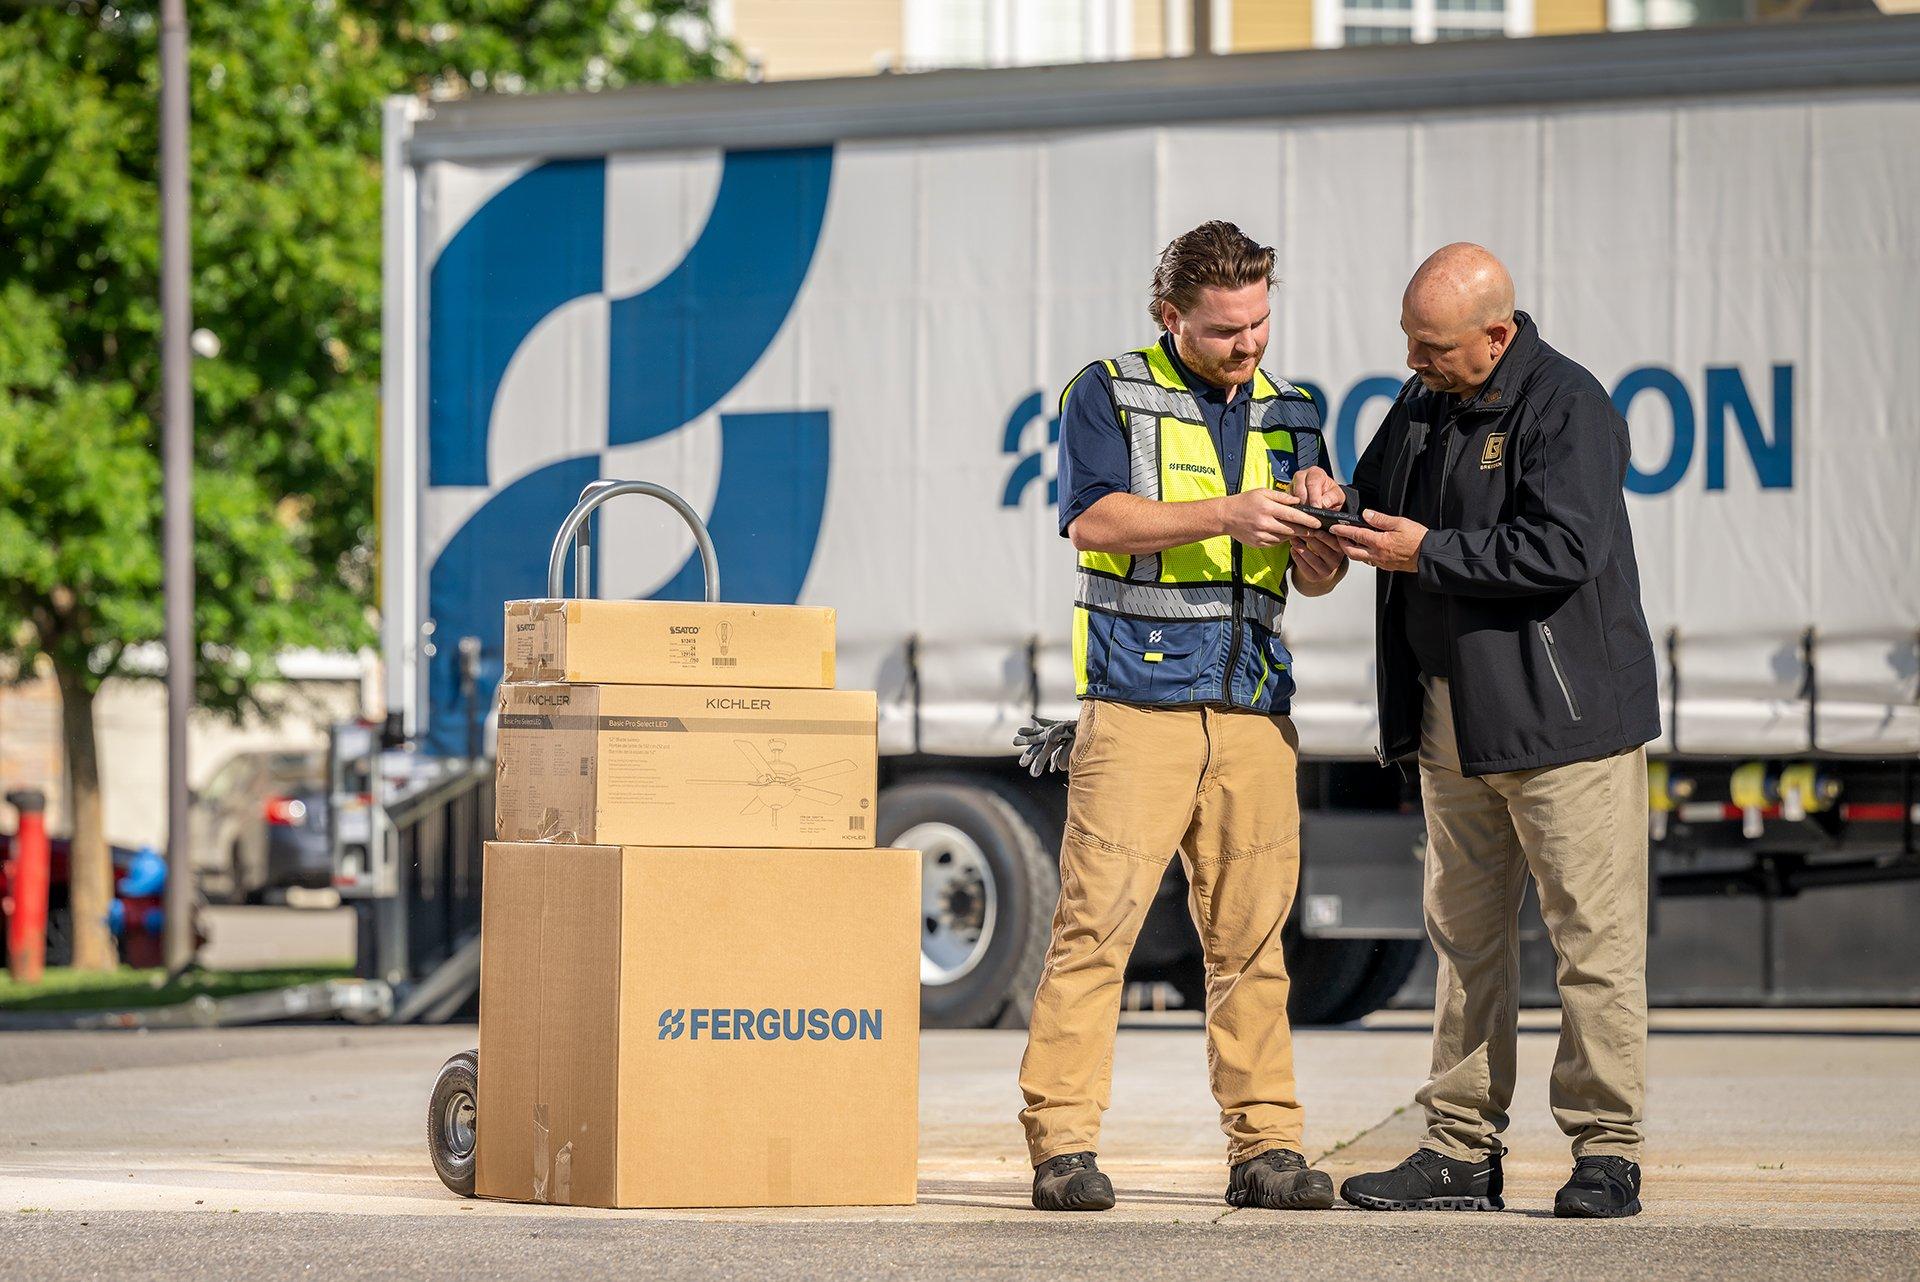 A customer signs a tablet from a Ferguson associate delivering packages on a dolly, and a Ferguson truck is in the background.